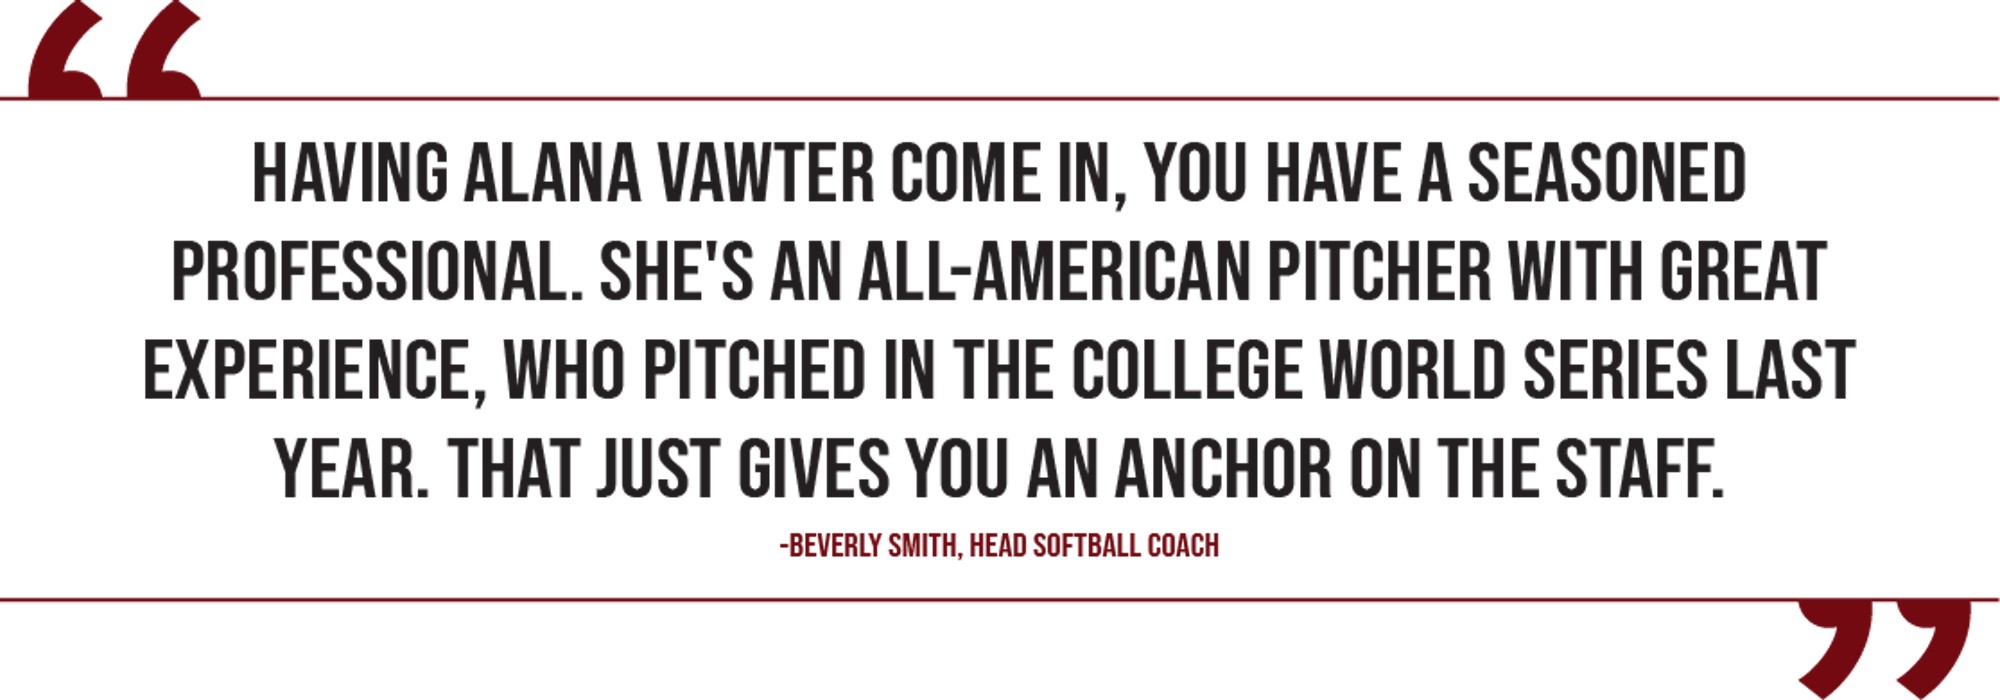 alana vawter pull quote.png